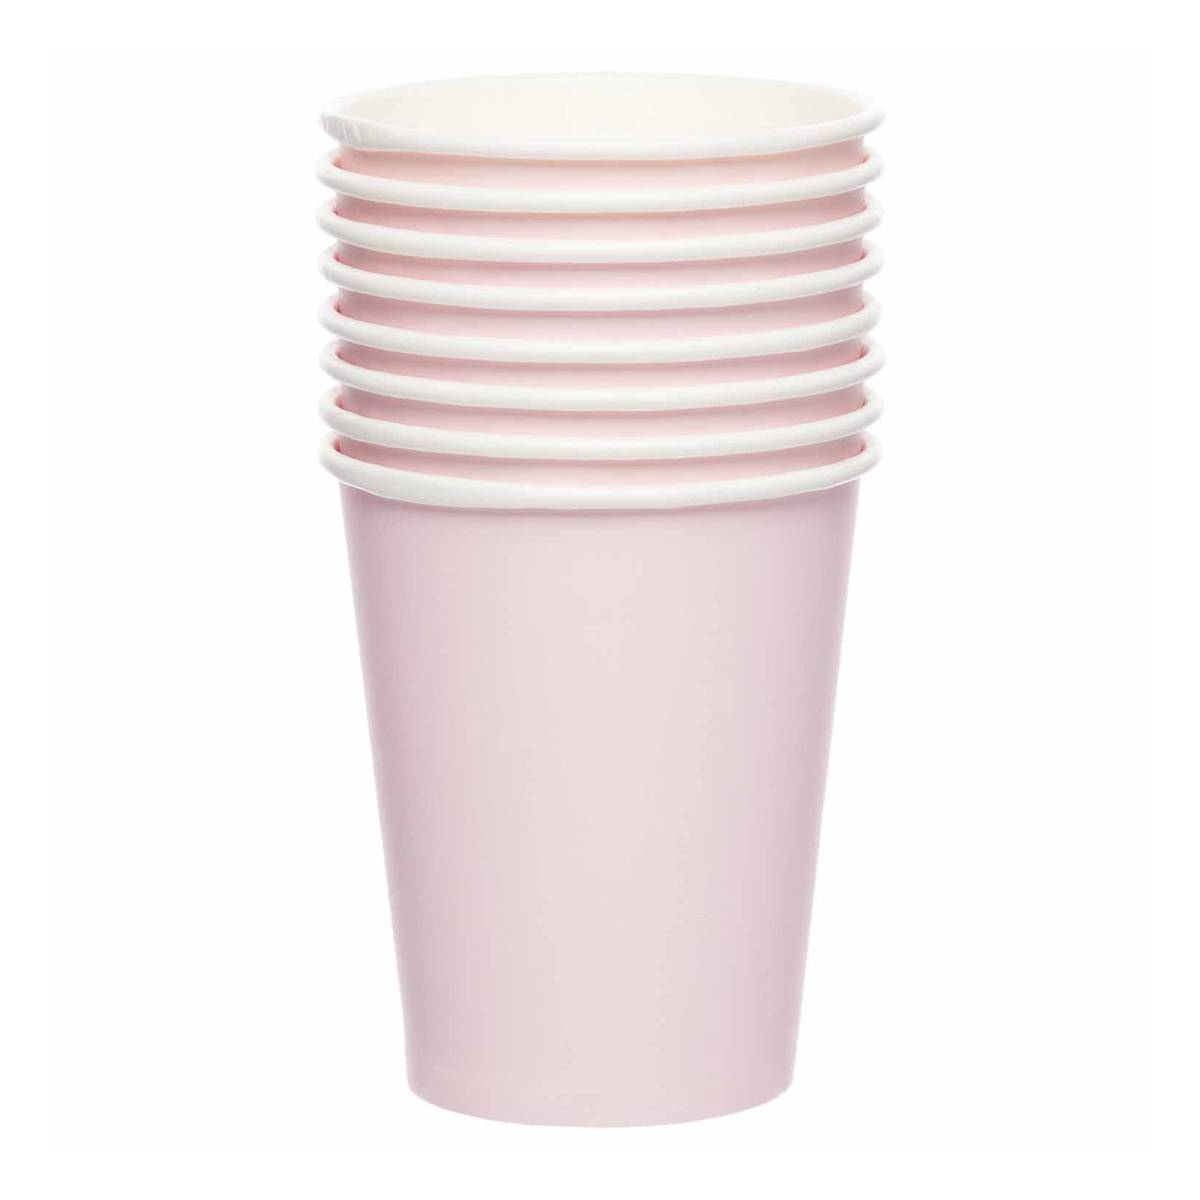 Marshmallow Paper Cups 8 Pack